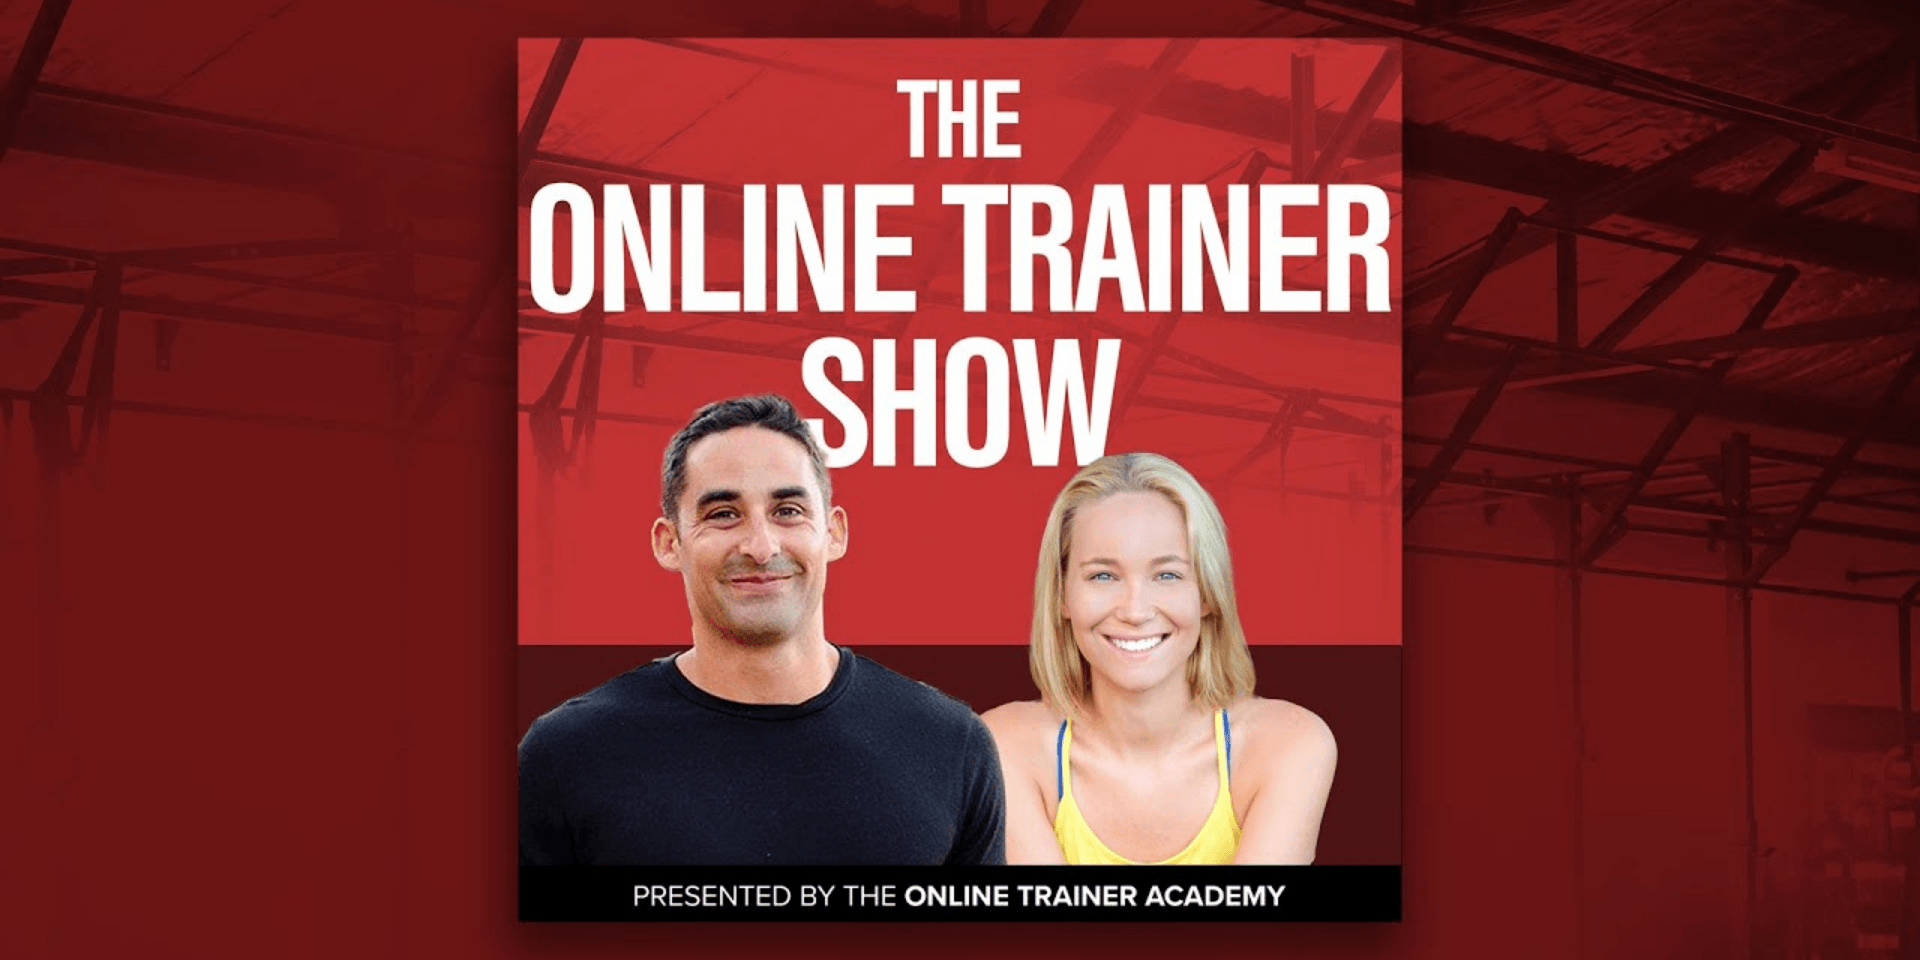 online-trainer-show-cover-image-with-jon-and-amber-with-play-button-for-episode-on-creating-a-brand-new-online-training-business